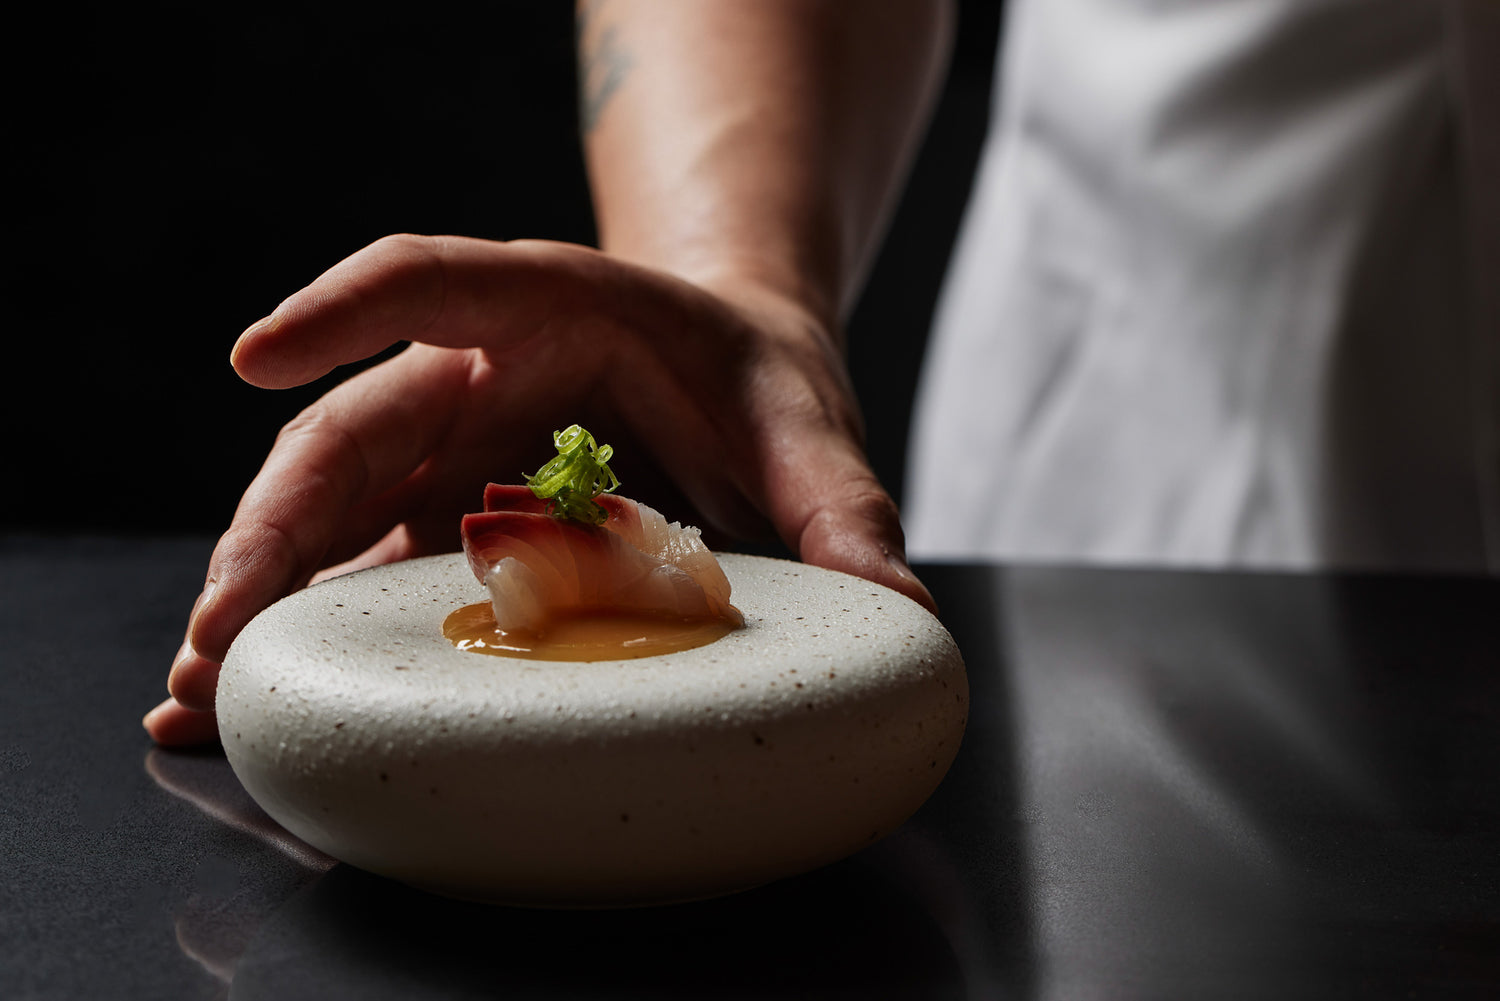 AOI TSUKI’s skilled chef creates individualised, season and produce led degustations – and you get a front-row seat to savour the skill